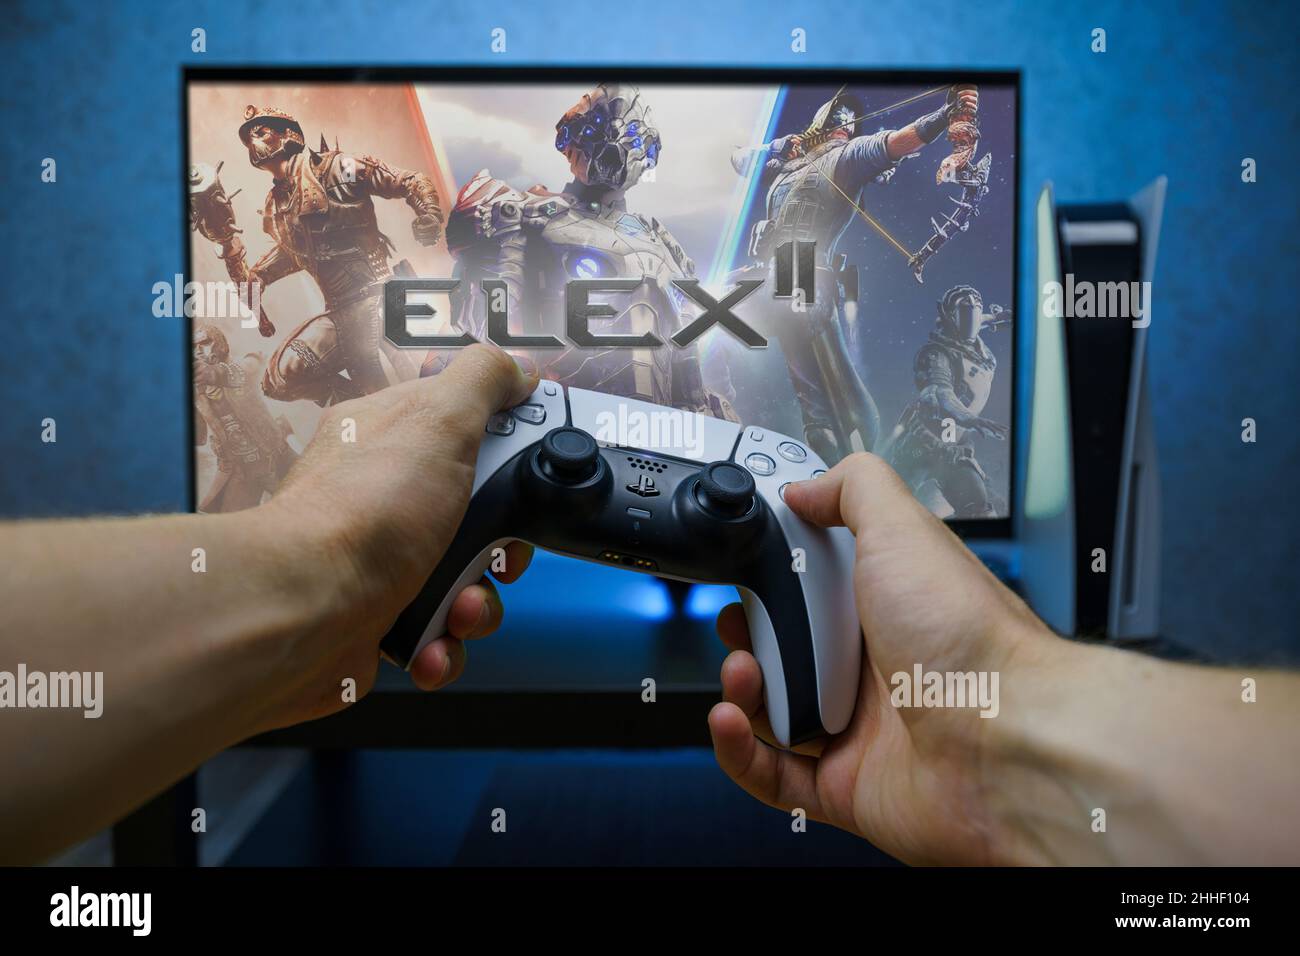 ELEX II video game. Point of view angle of playing video game with Playstation 5 console. Stock Photo